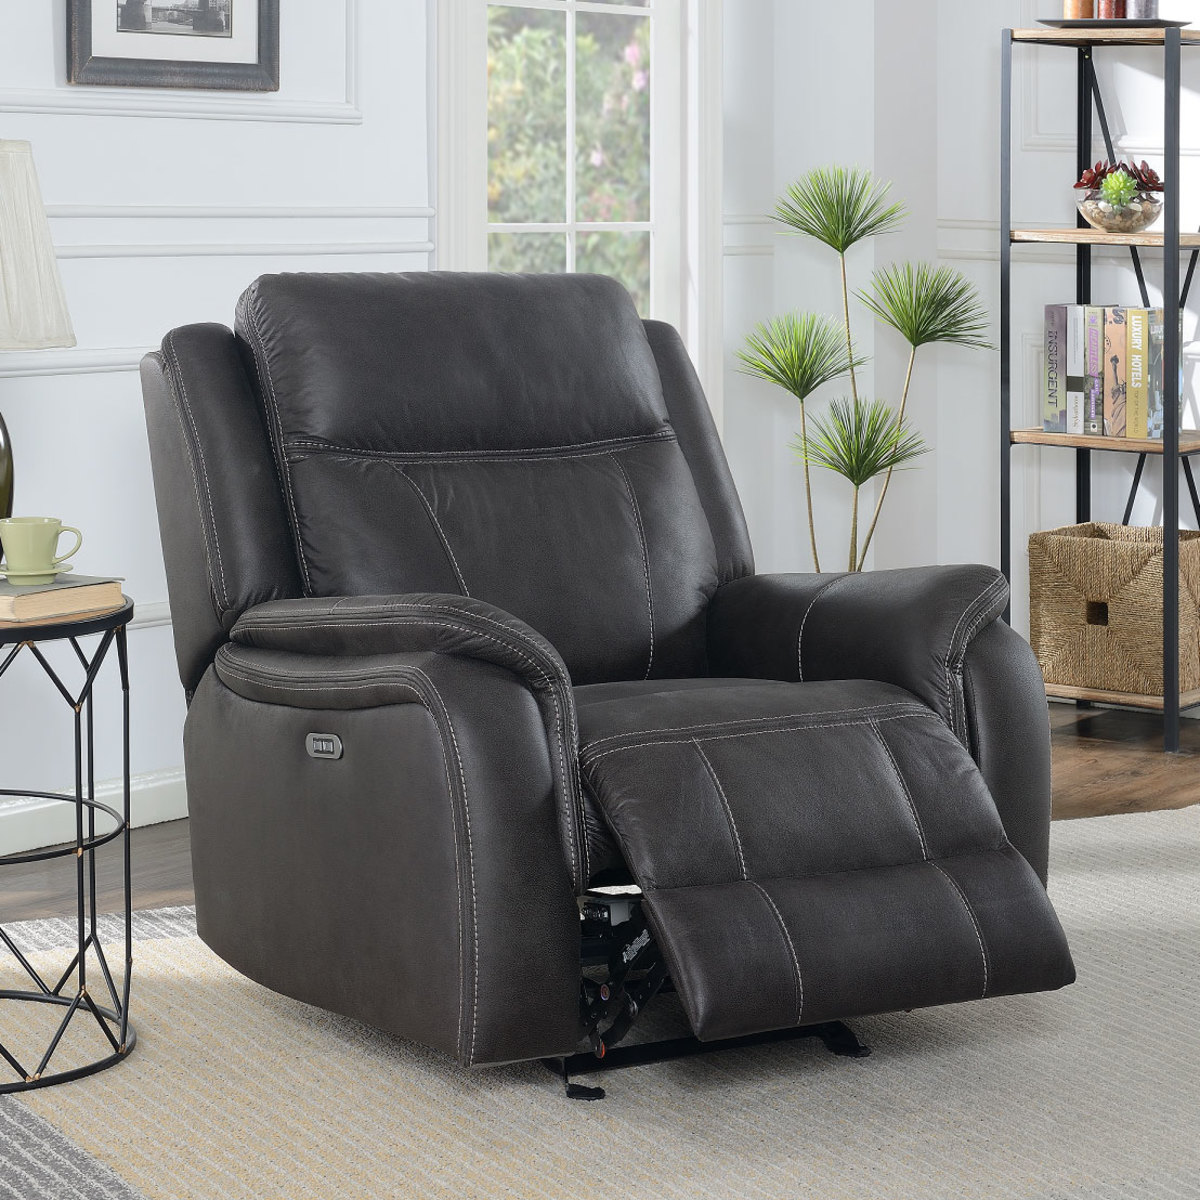 mstar international parkwright brown fabric power glider recliner chair   costco uk